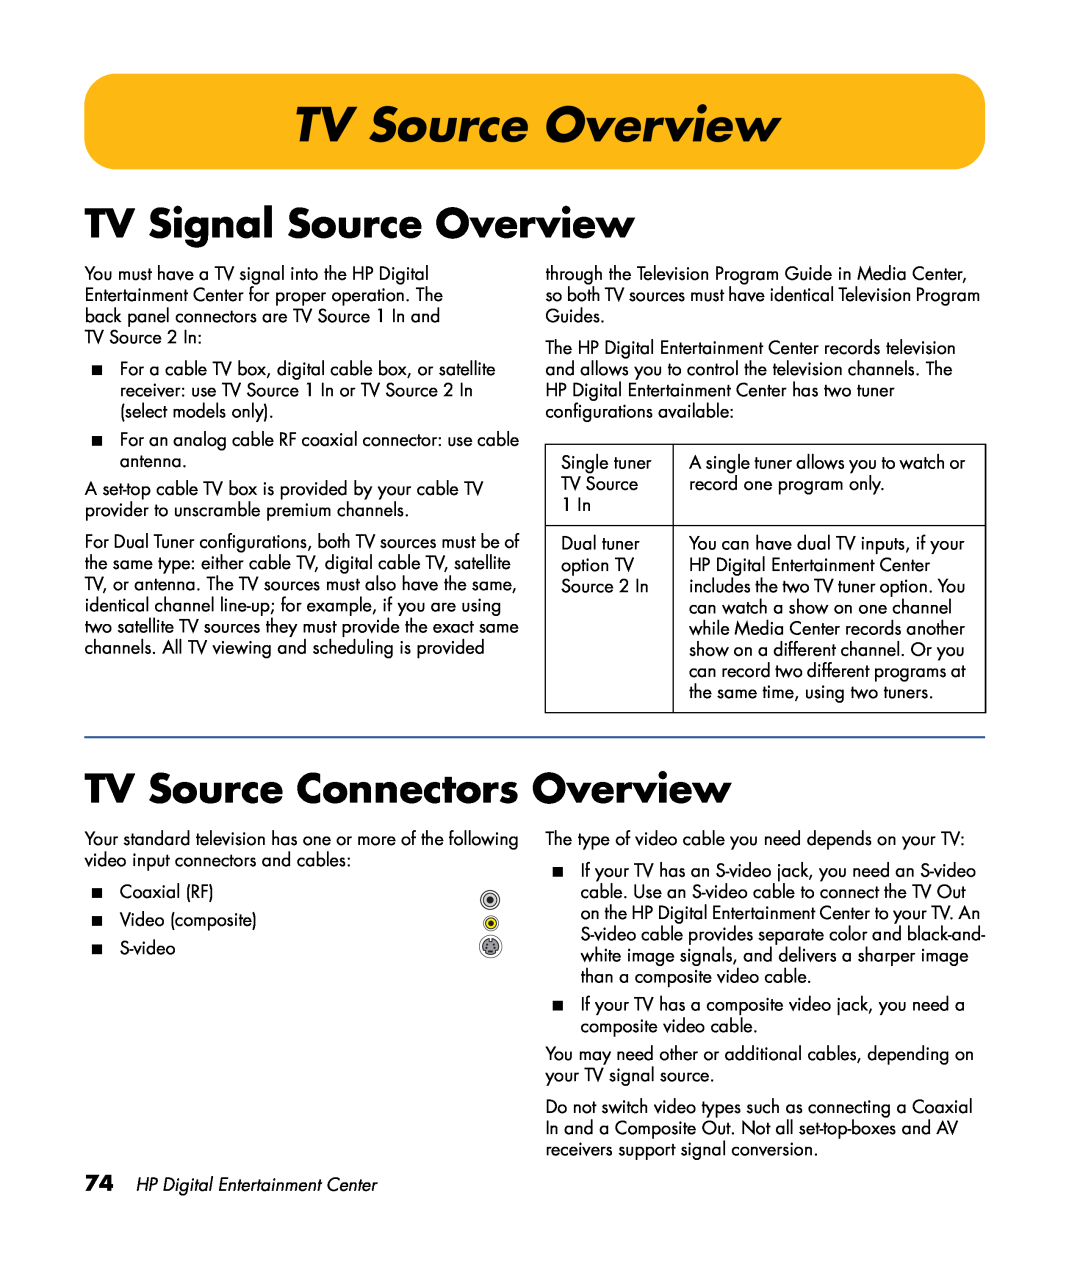 HP z557 TV Source Overview, TV Signal Source Overview, TV Source Connectors Overview, HP Digital Entertainment Center 